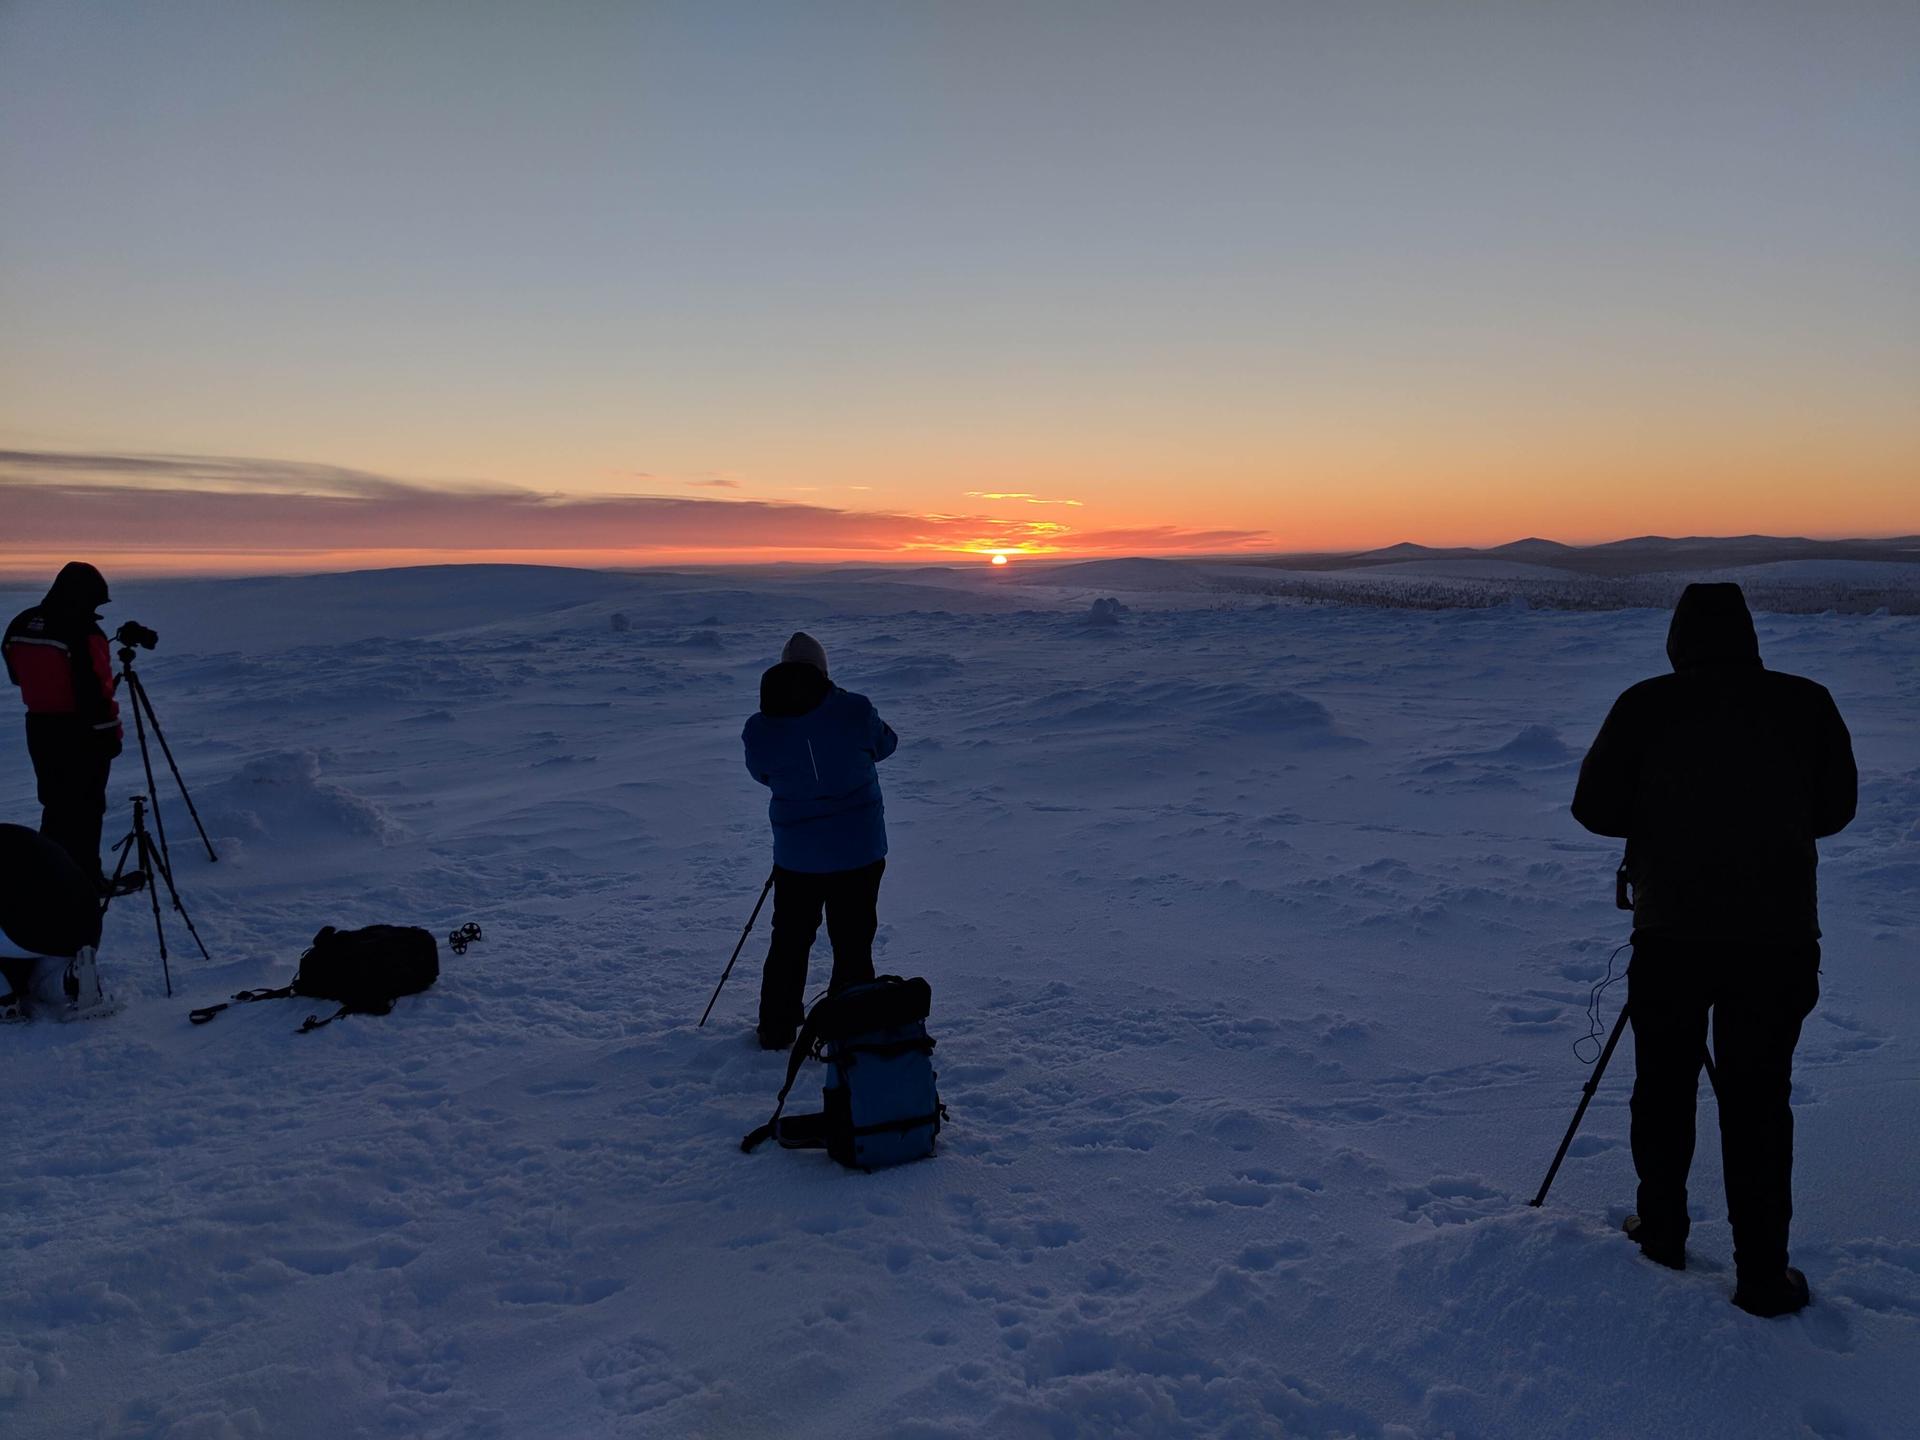 photographers on a field of snow, rising sun in background